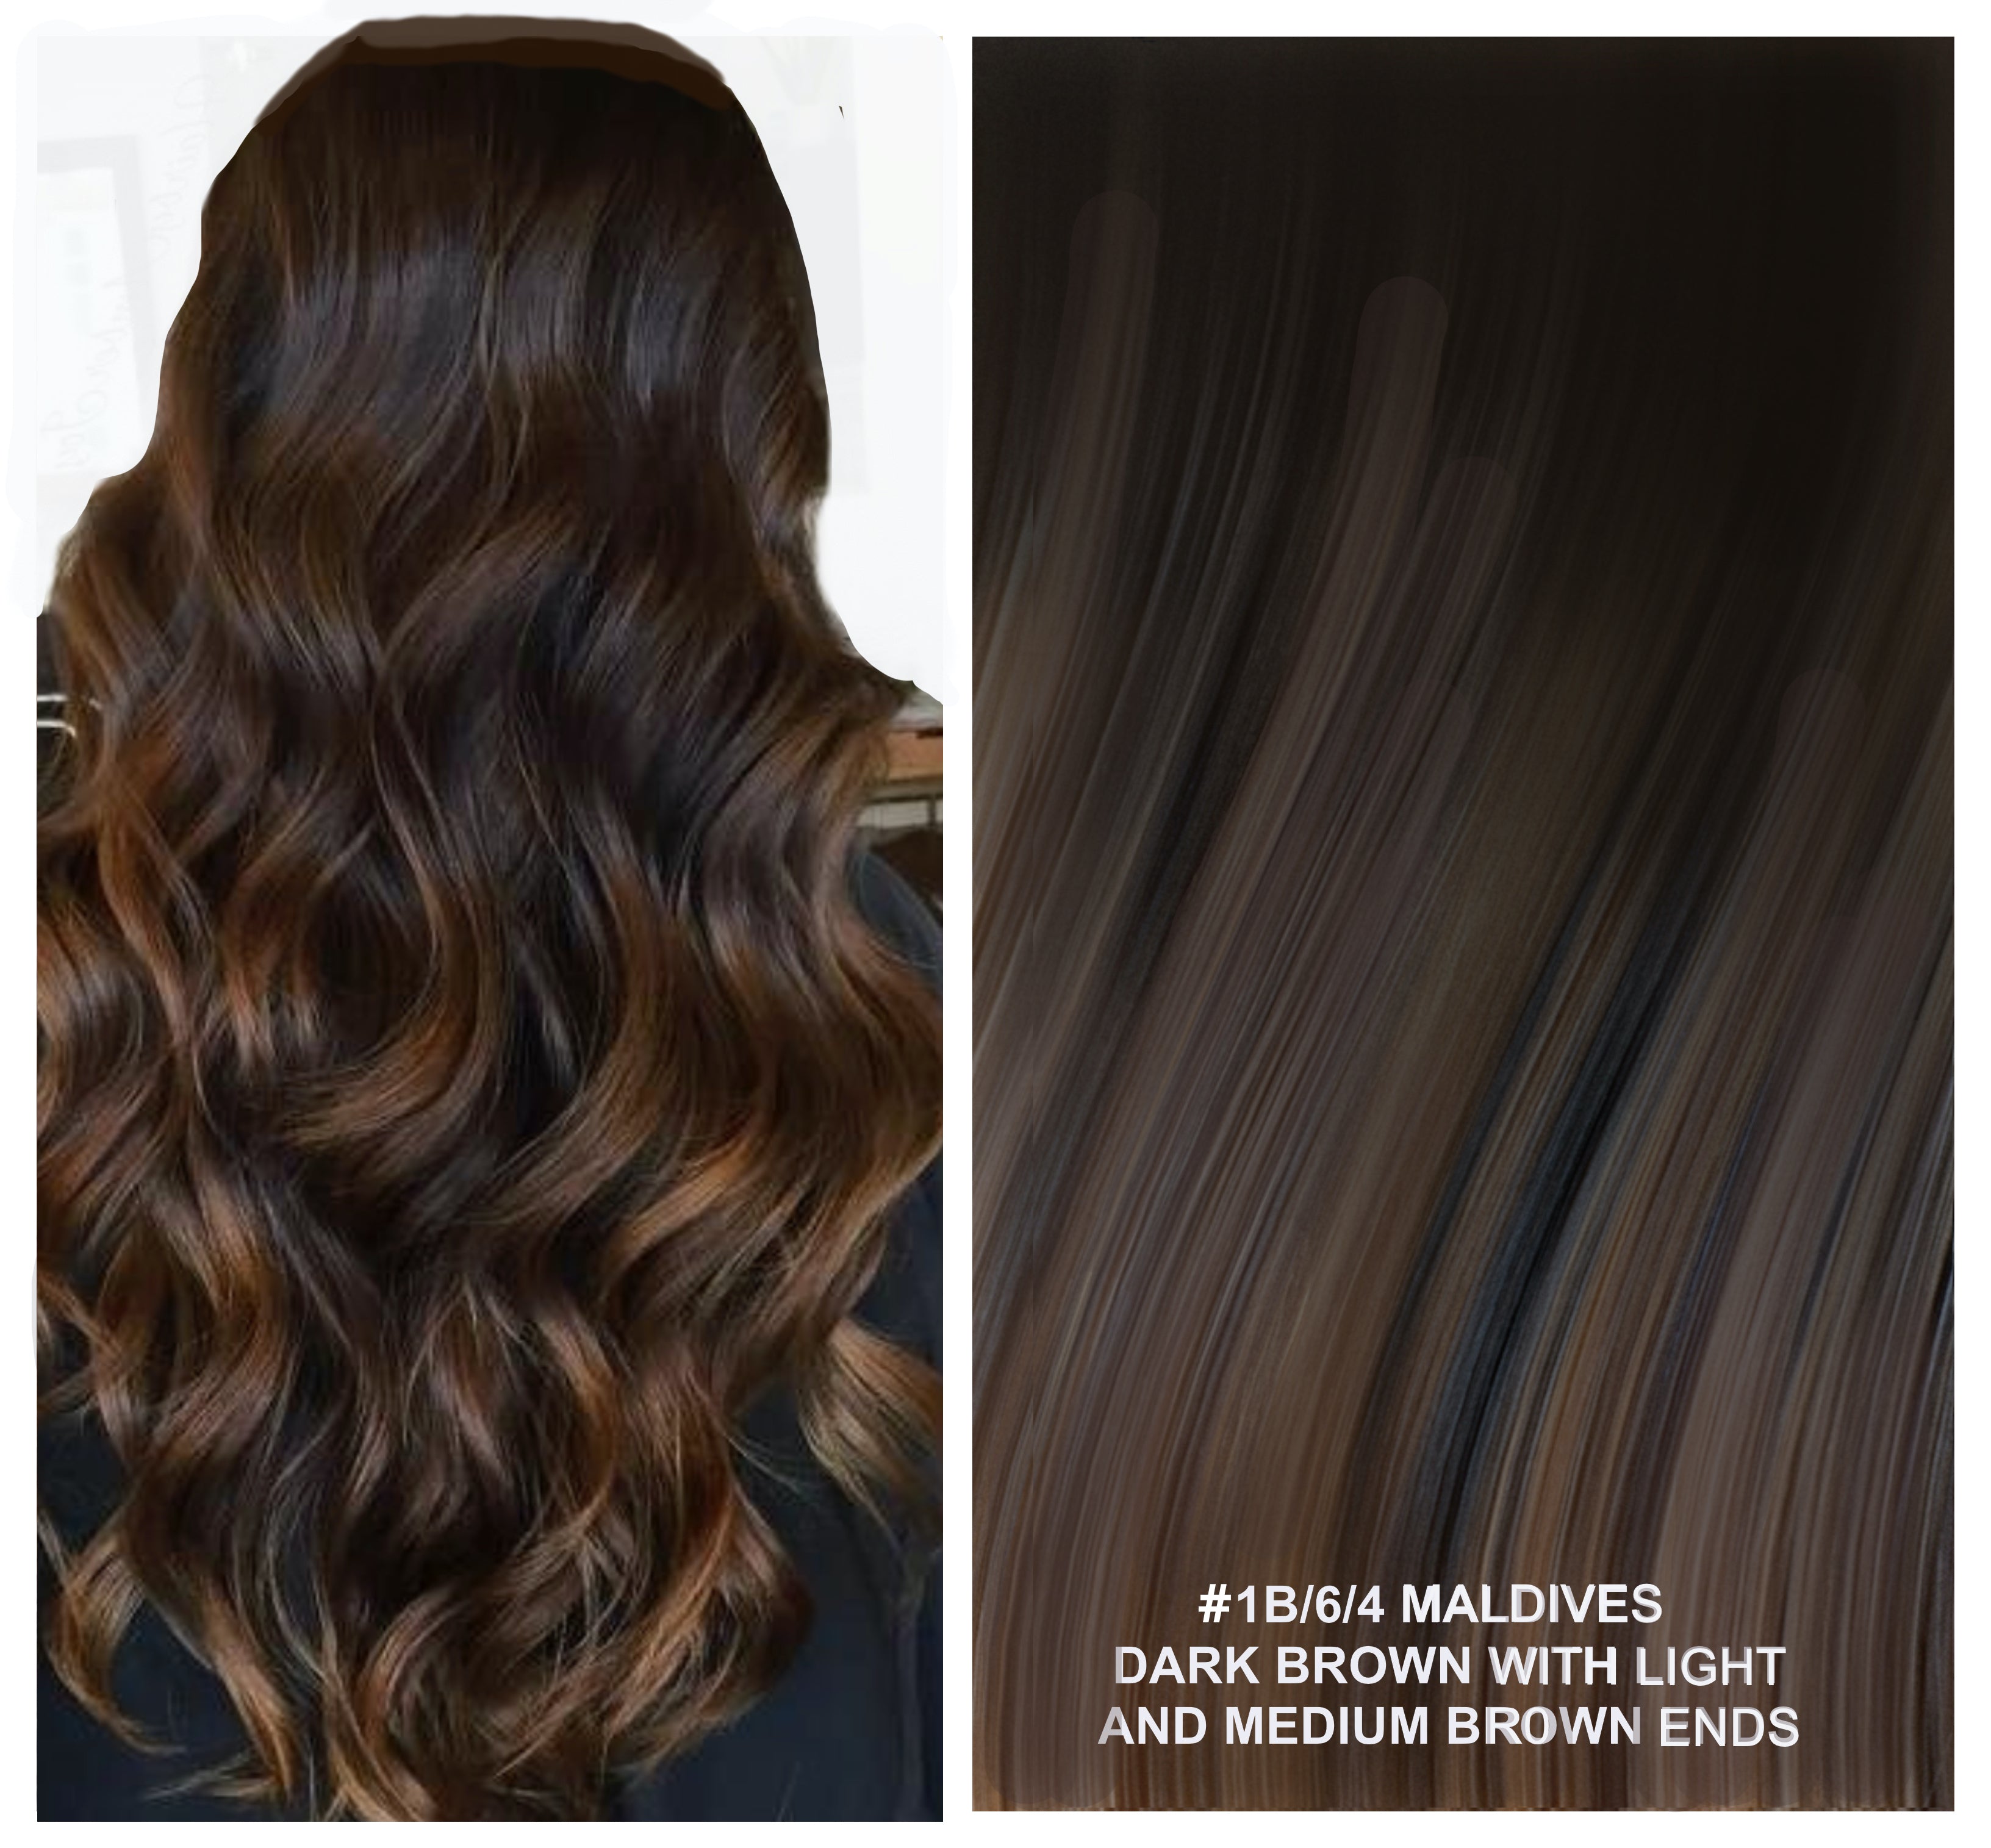 RUSSIAN TAPE HAIR EXTENSIONS HIGHLIGHTS #1B/6/4 - MALDIVES - DARK BROWN WITH LIGHT AND MEDIUM BROWN ENDS